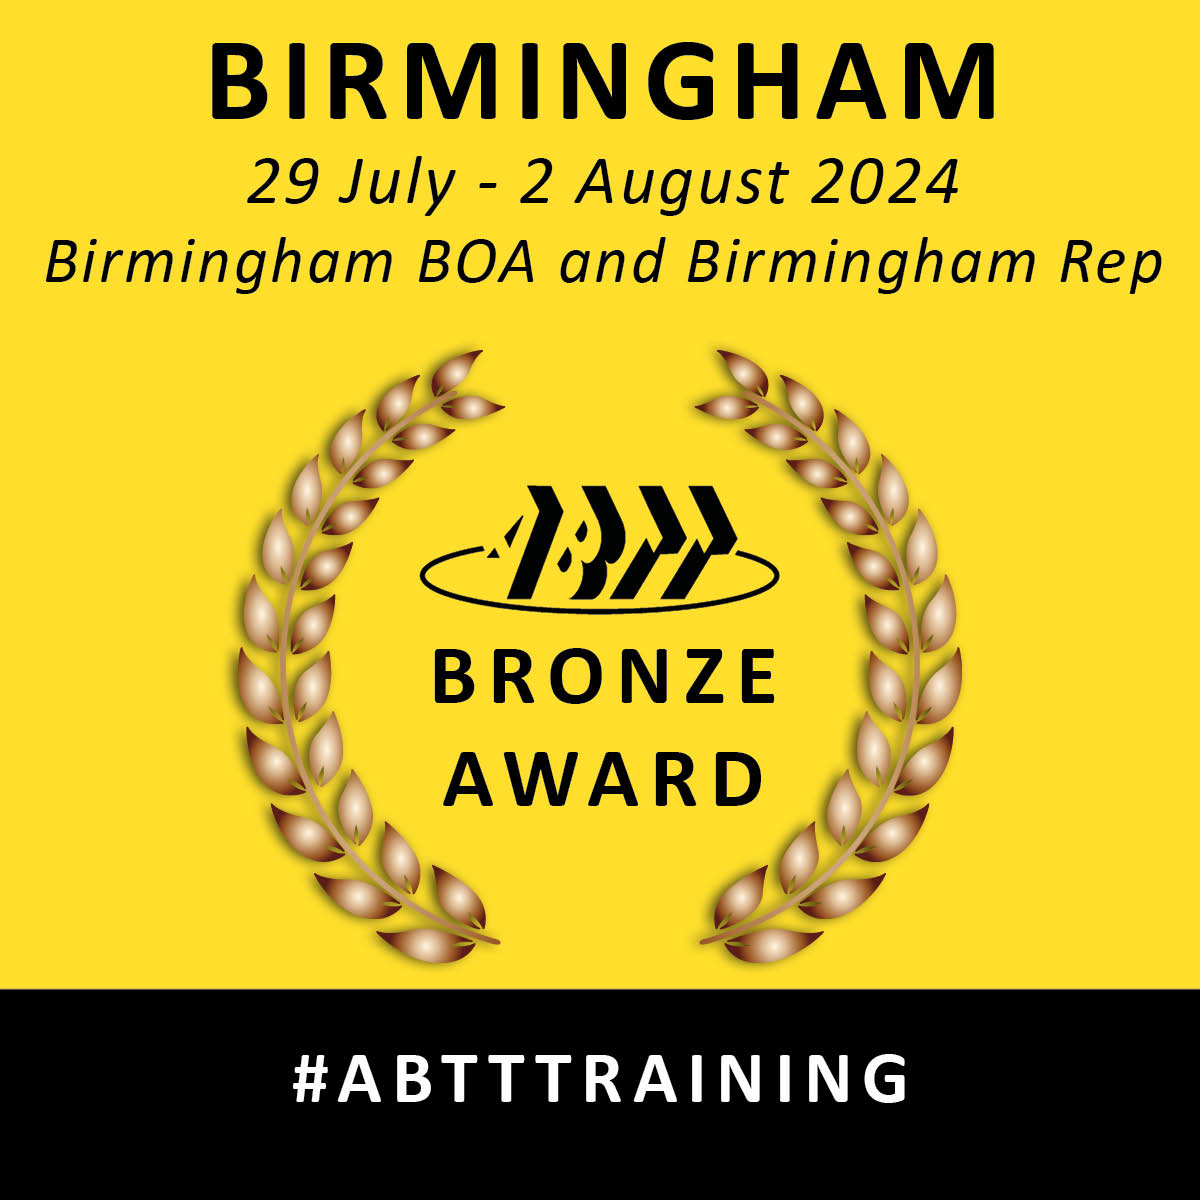 Now booking: ABTT Bronze Award for Theatre Technicians – Birmingham, 29 July - 2 Aug.

A five-day course which gives candidates knowledge & understanding of best practices & is a SCQF Level 7 qualification.

abtt.org.uk/events/abtt-br…

#ABTTtraining #ABTT #Theatre #TheatreTechnician